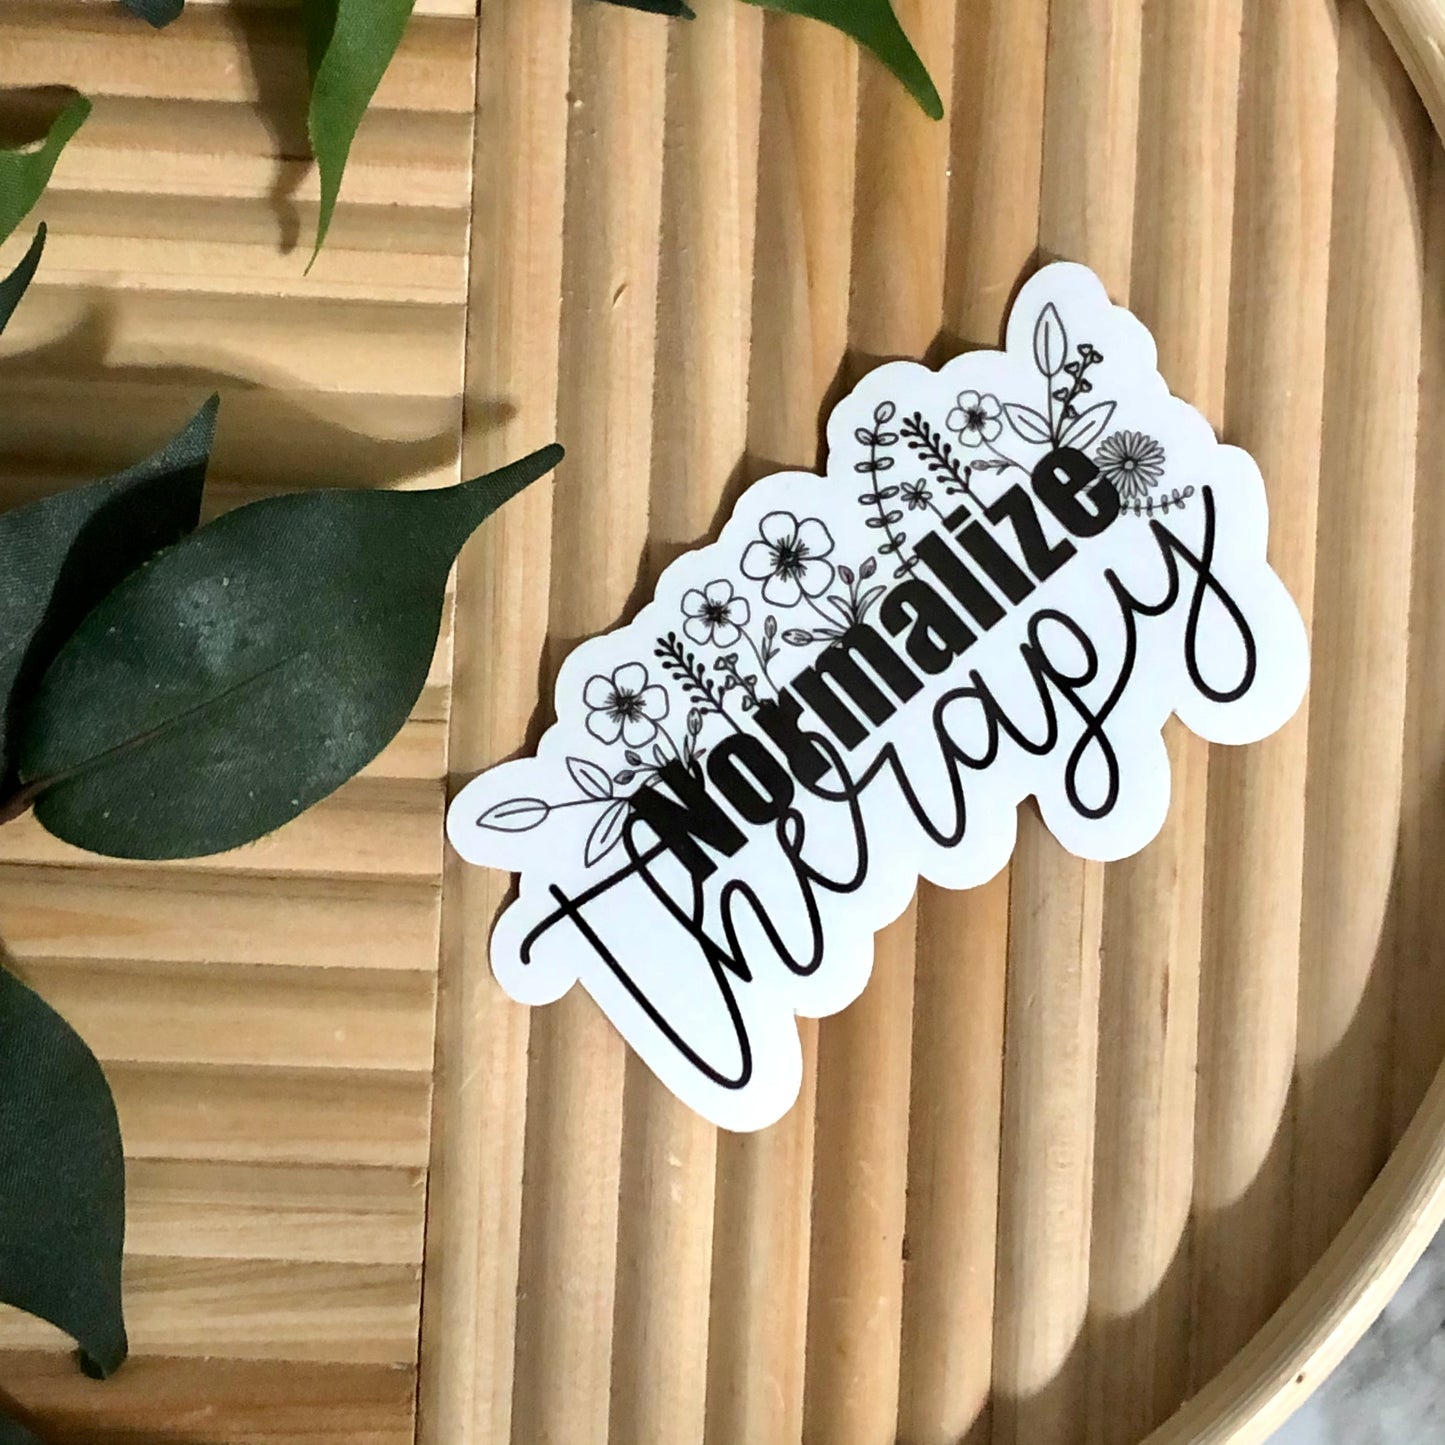 Normalize Therapy Vinyl Sticker.